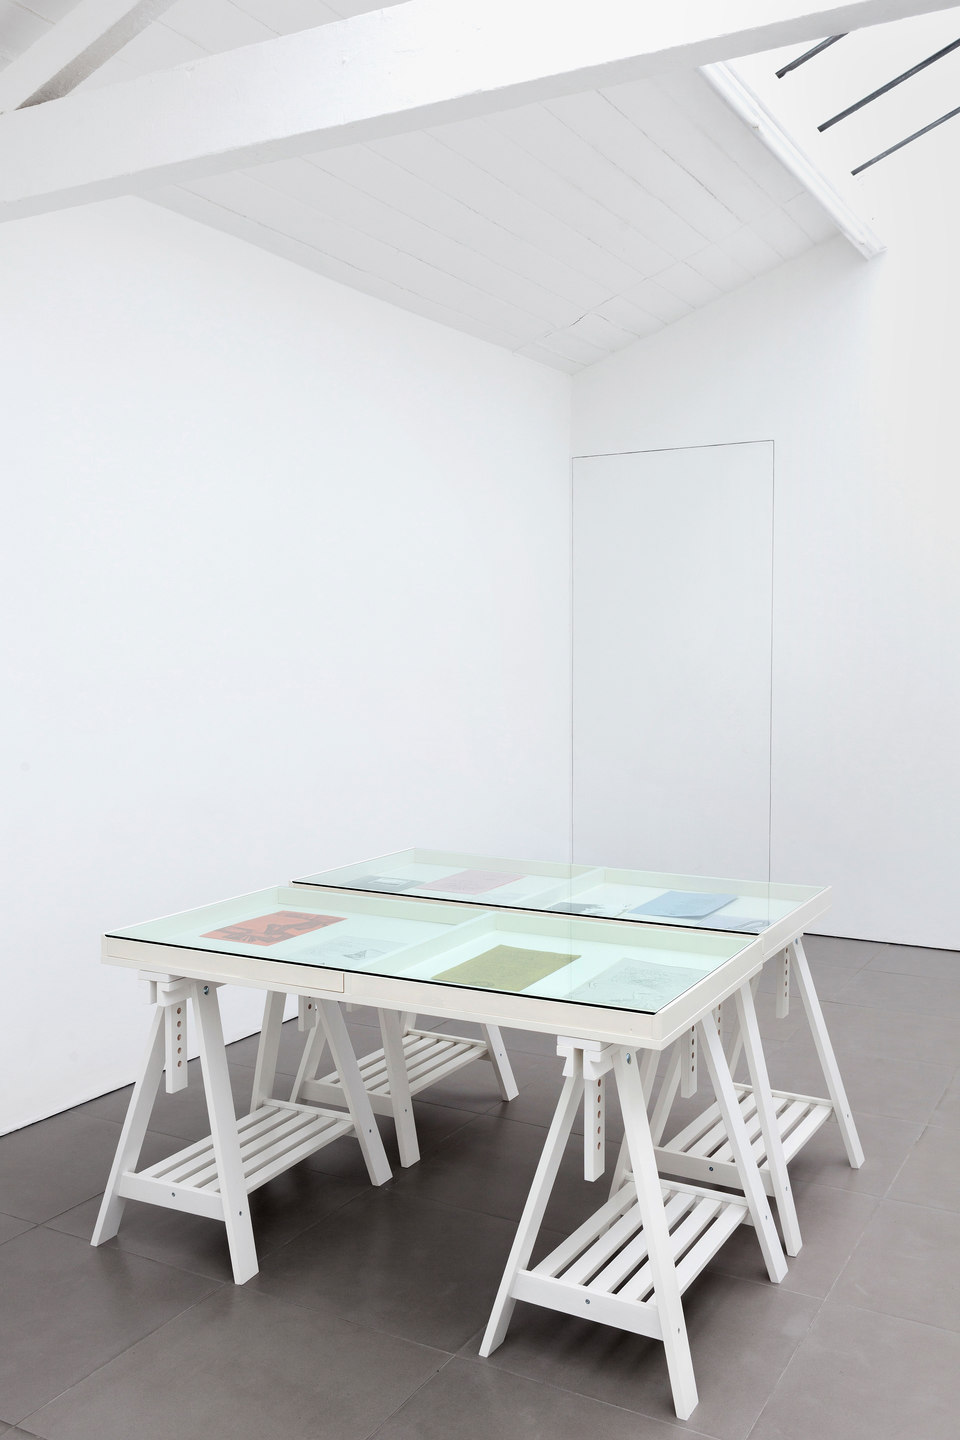 Barbara T Smith, The Poetry Sets, Installation View, 2015, Cell Projects